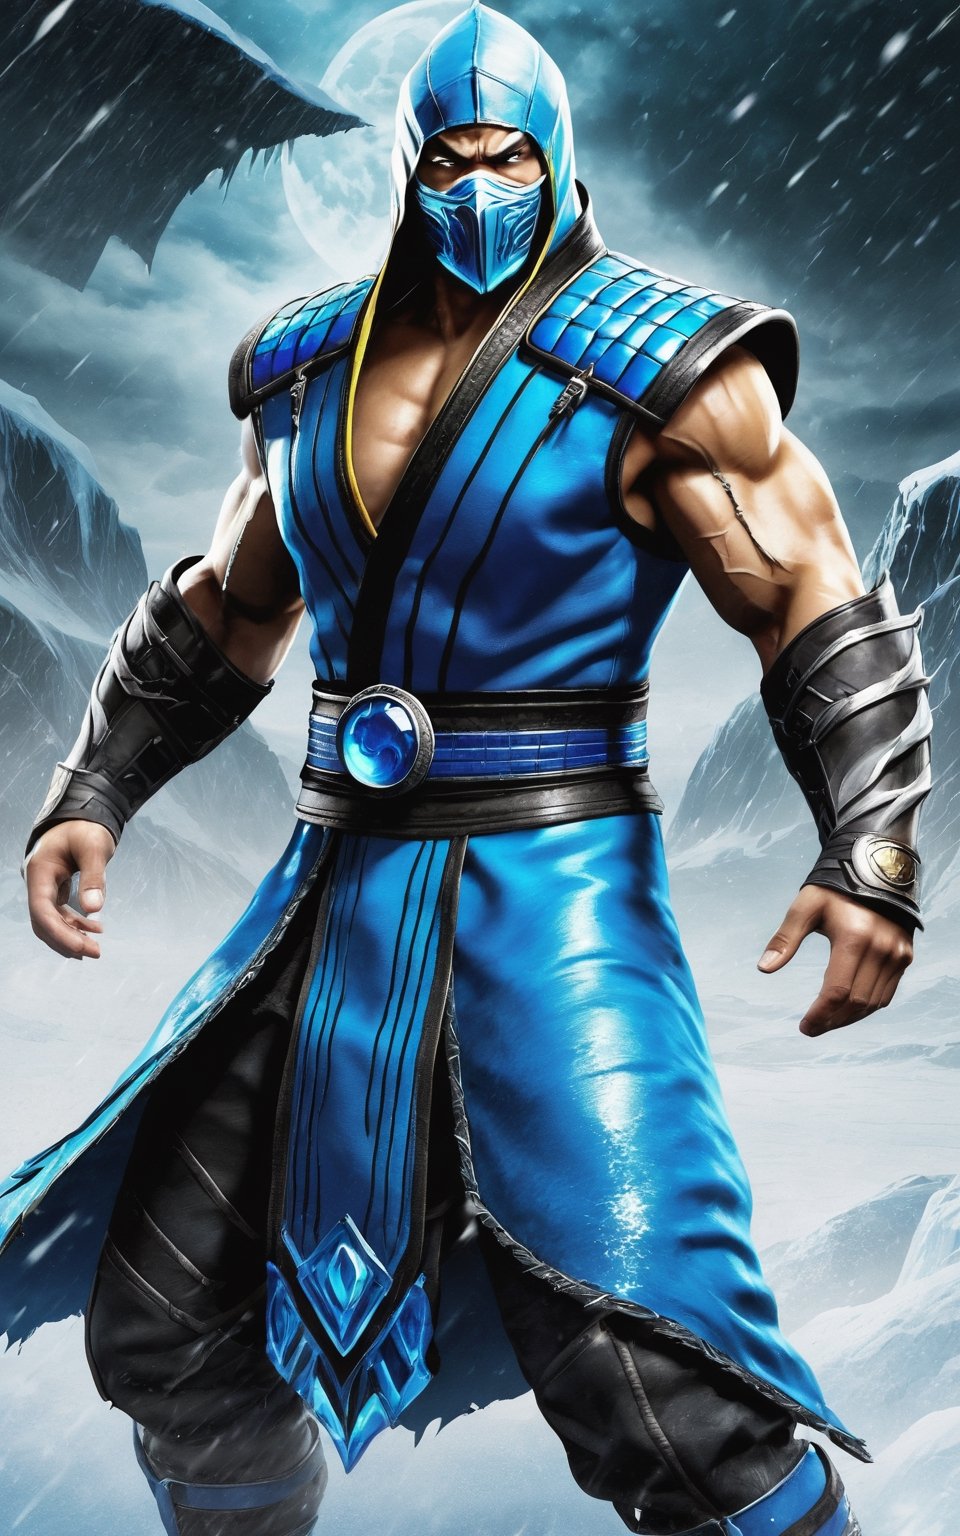 (best quality,8K,highres,masterpiece), ultra-detailed, (Subzero from Mortal Kombat splash art), Subzero from Mortal Kombat in a splash art format. He possesses a lean and slim body, with a skull face that exudes an aura of terror. His cold, dull, lifeless eyes pierce through the viewer, instilling fear and dread. The wide landscape view adds to the epic scale of the scene, showcasing Subzero's formidable presence against the backdrop of a frozen and desolate landscape. The overall composition is chilling and menacing, capturing the essence of Subzero as a very scary character.